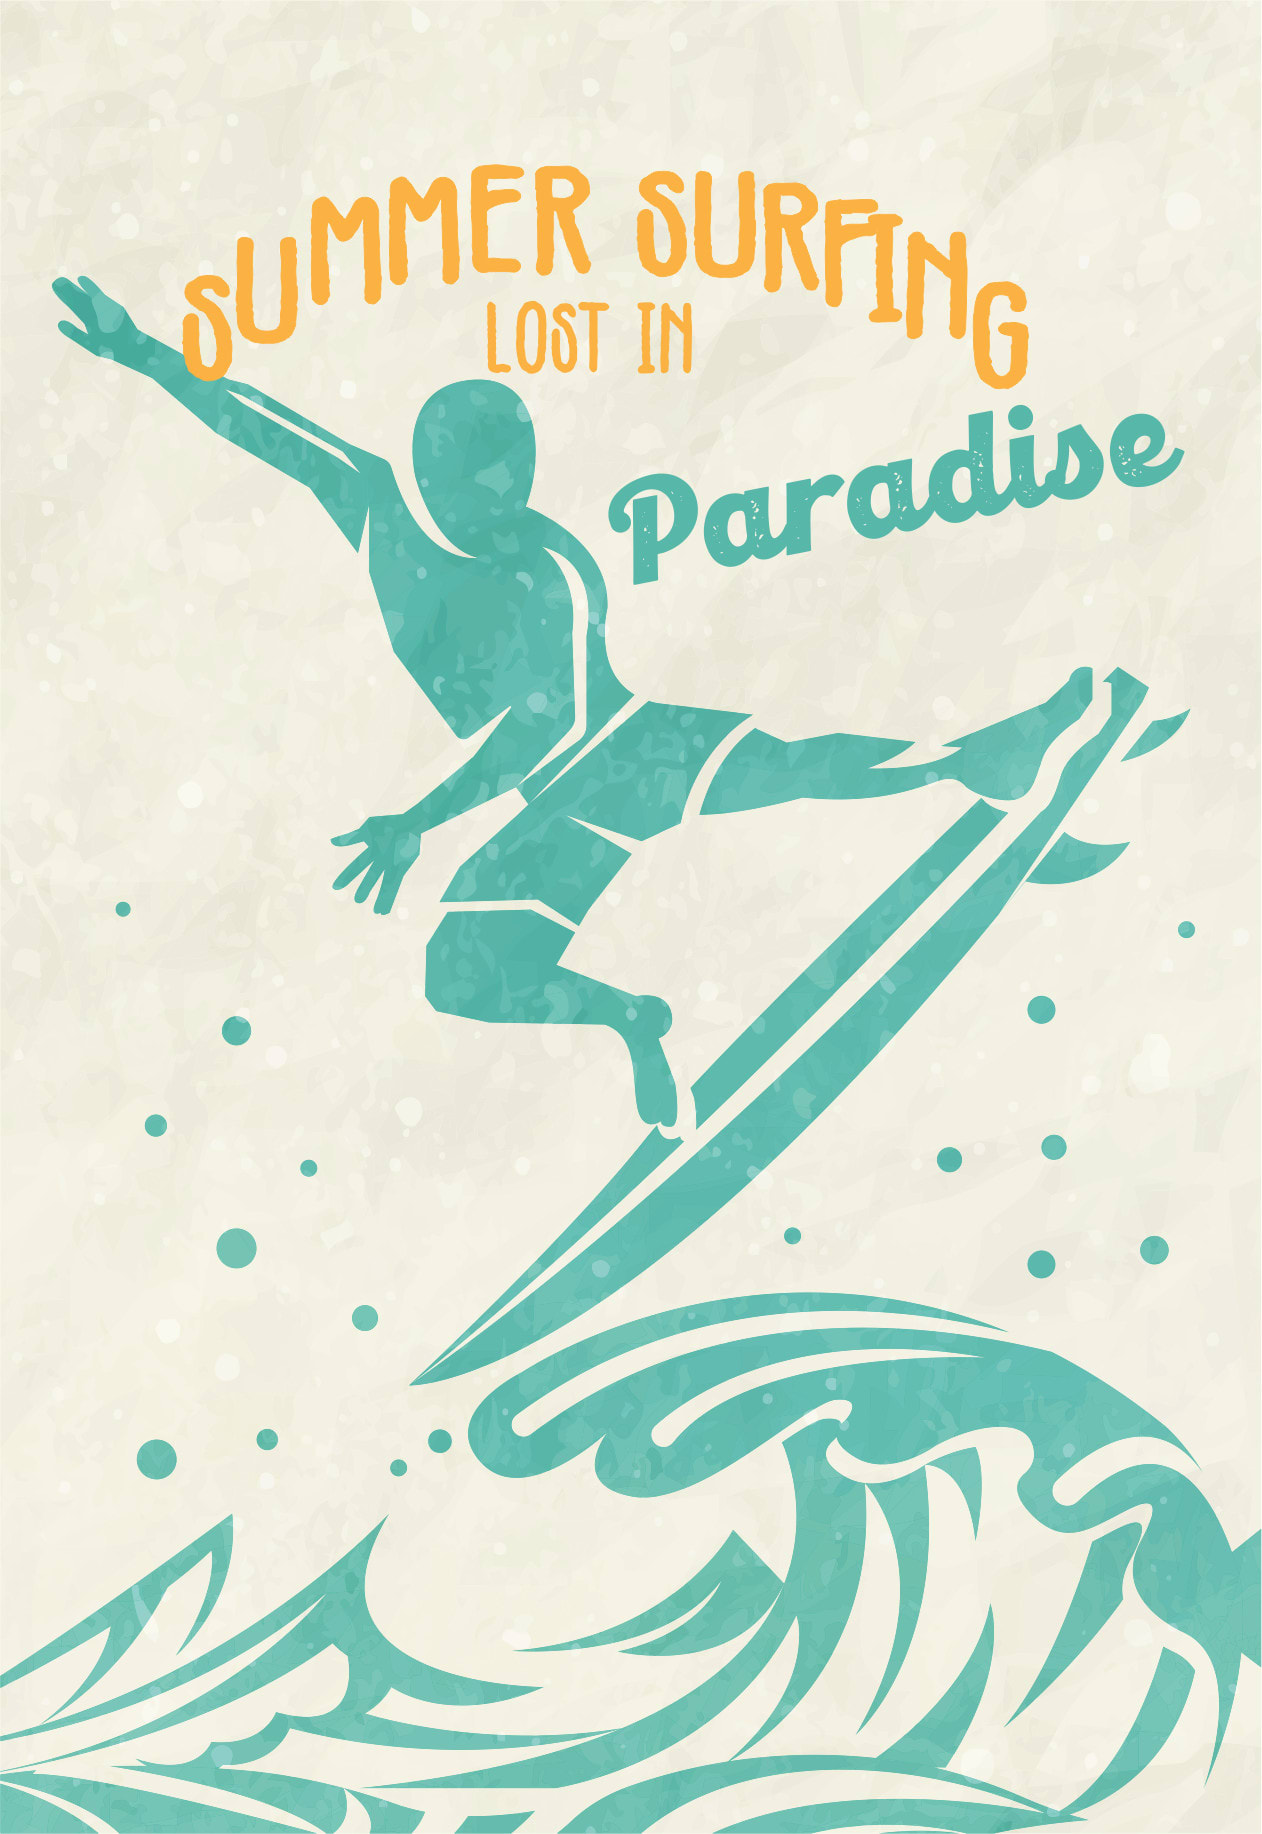 Paradise lost in